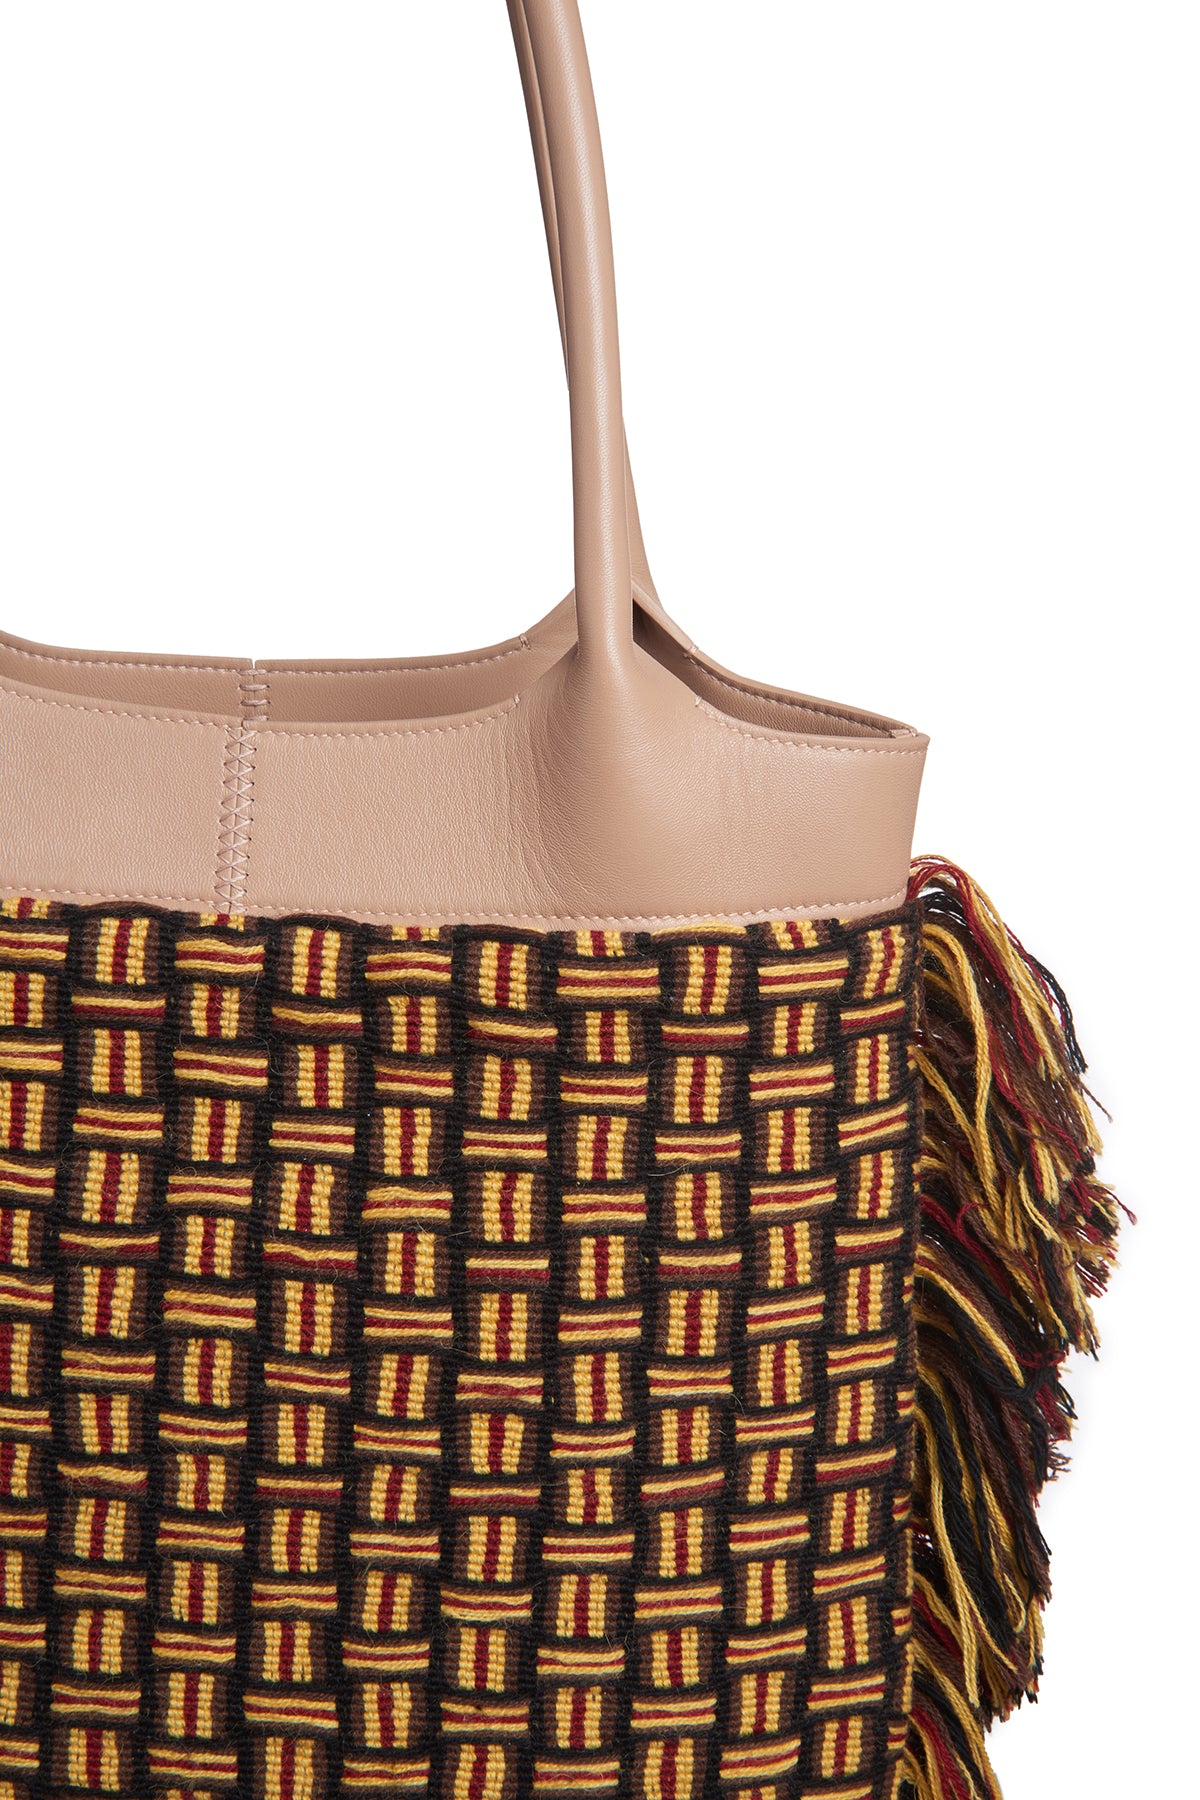 Tote Macrame Bag In Textiles & Leather